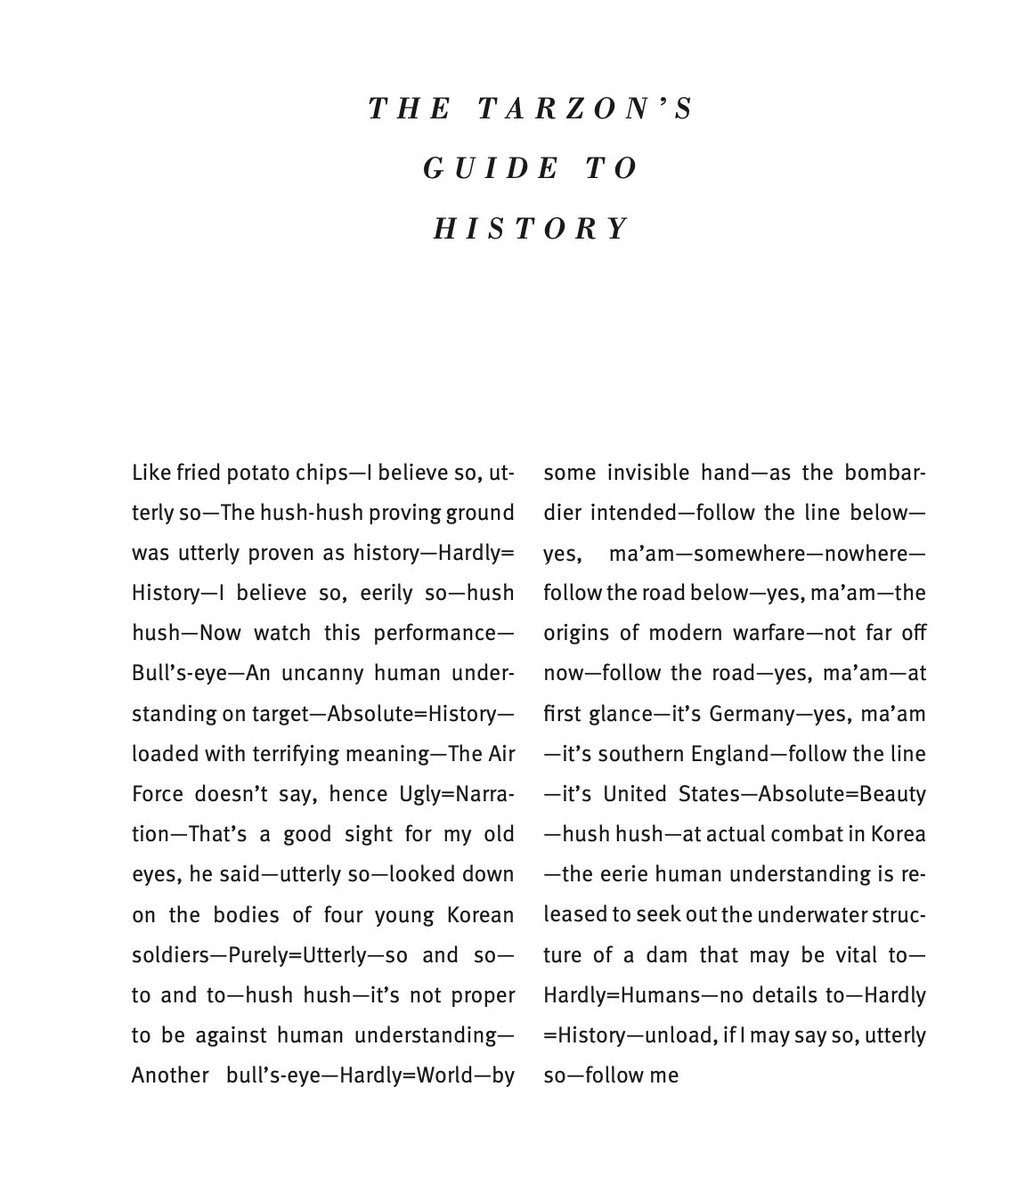 Like fried potato chips -- I believe so, ut- erly so -- The hush-hush providing ground was utterly proven as history -- Hardly = - @DonMeeChoi, 'The Tarzon's Guide to History'